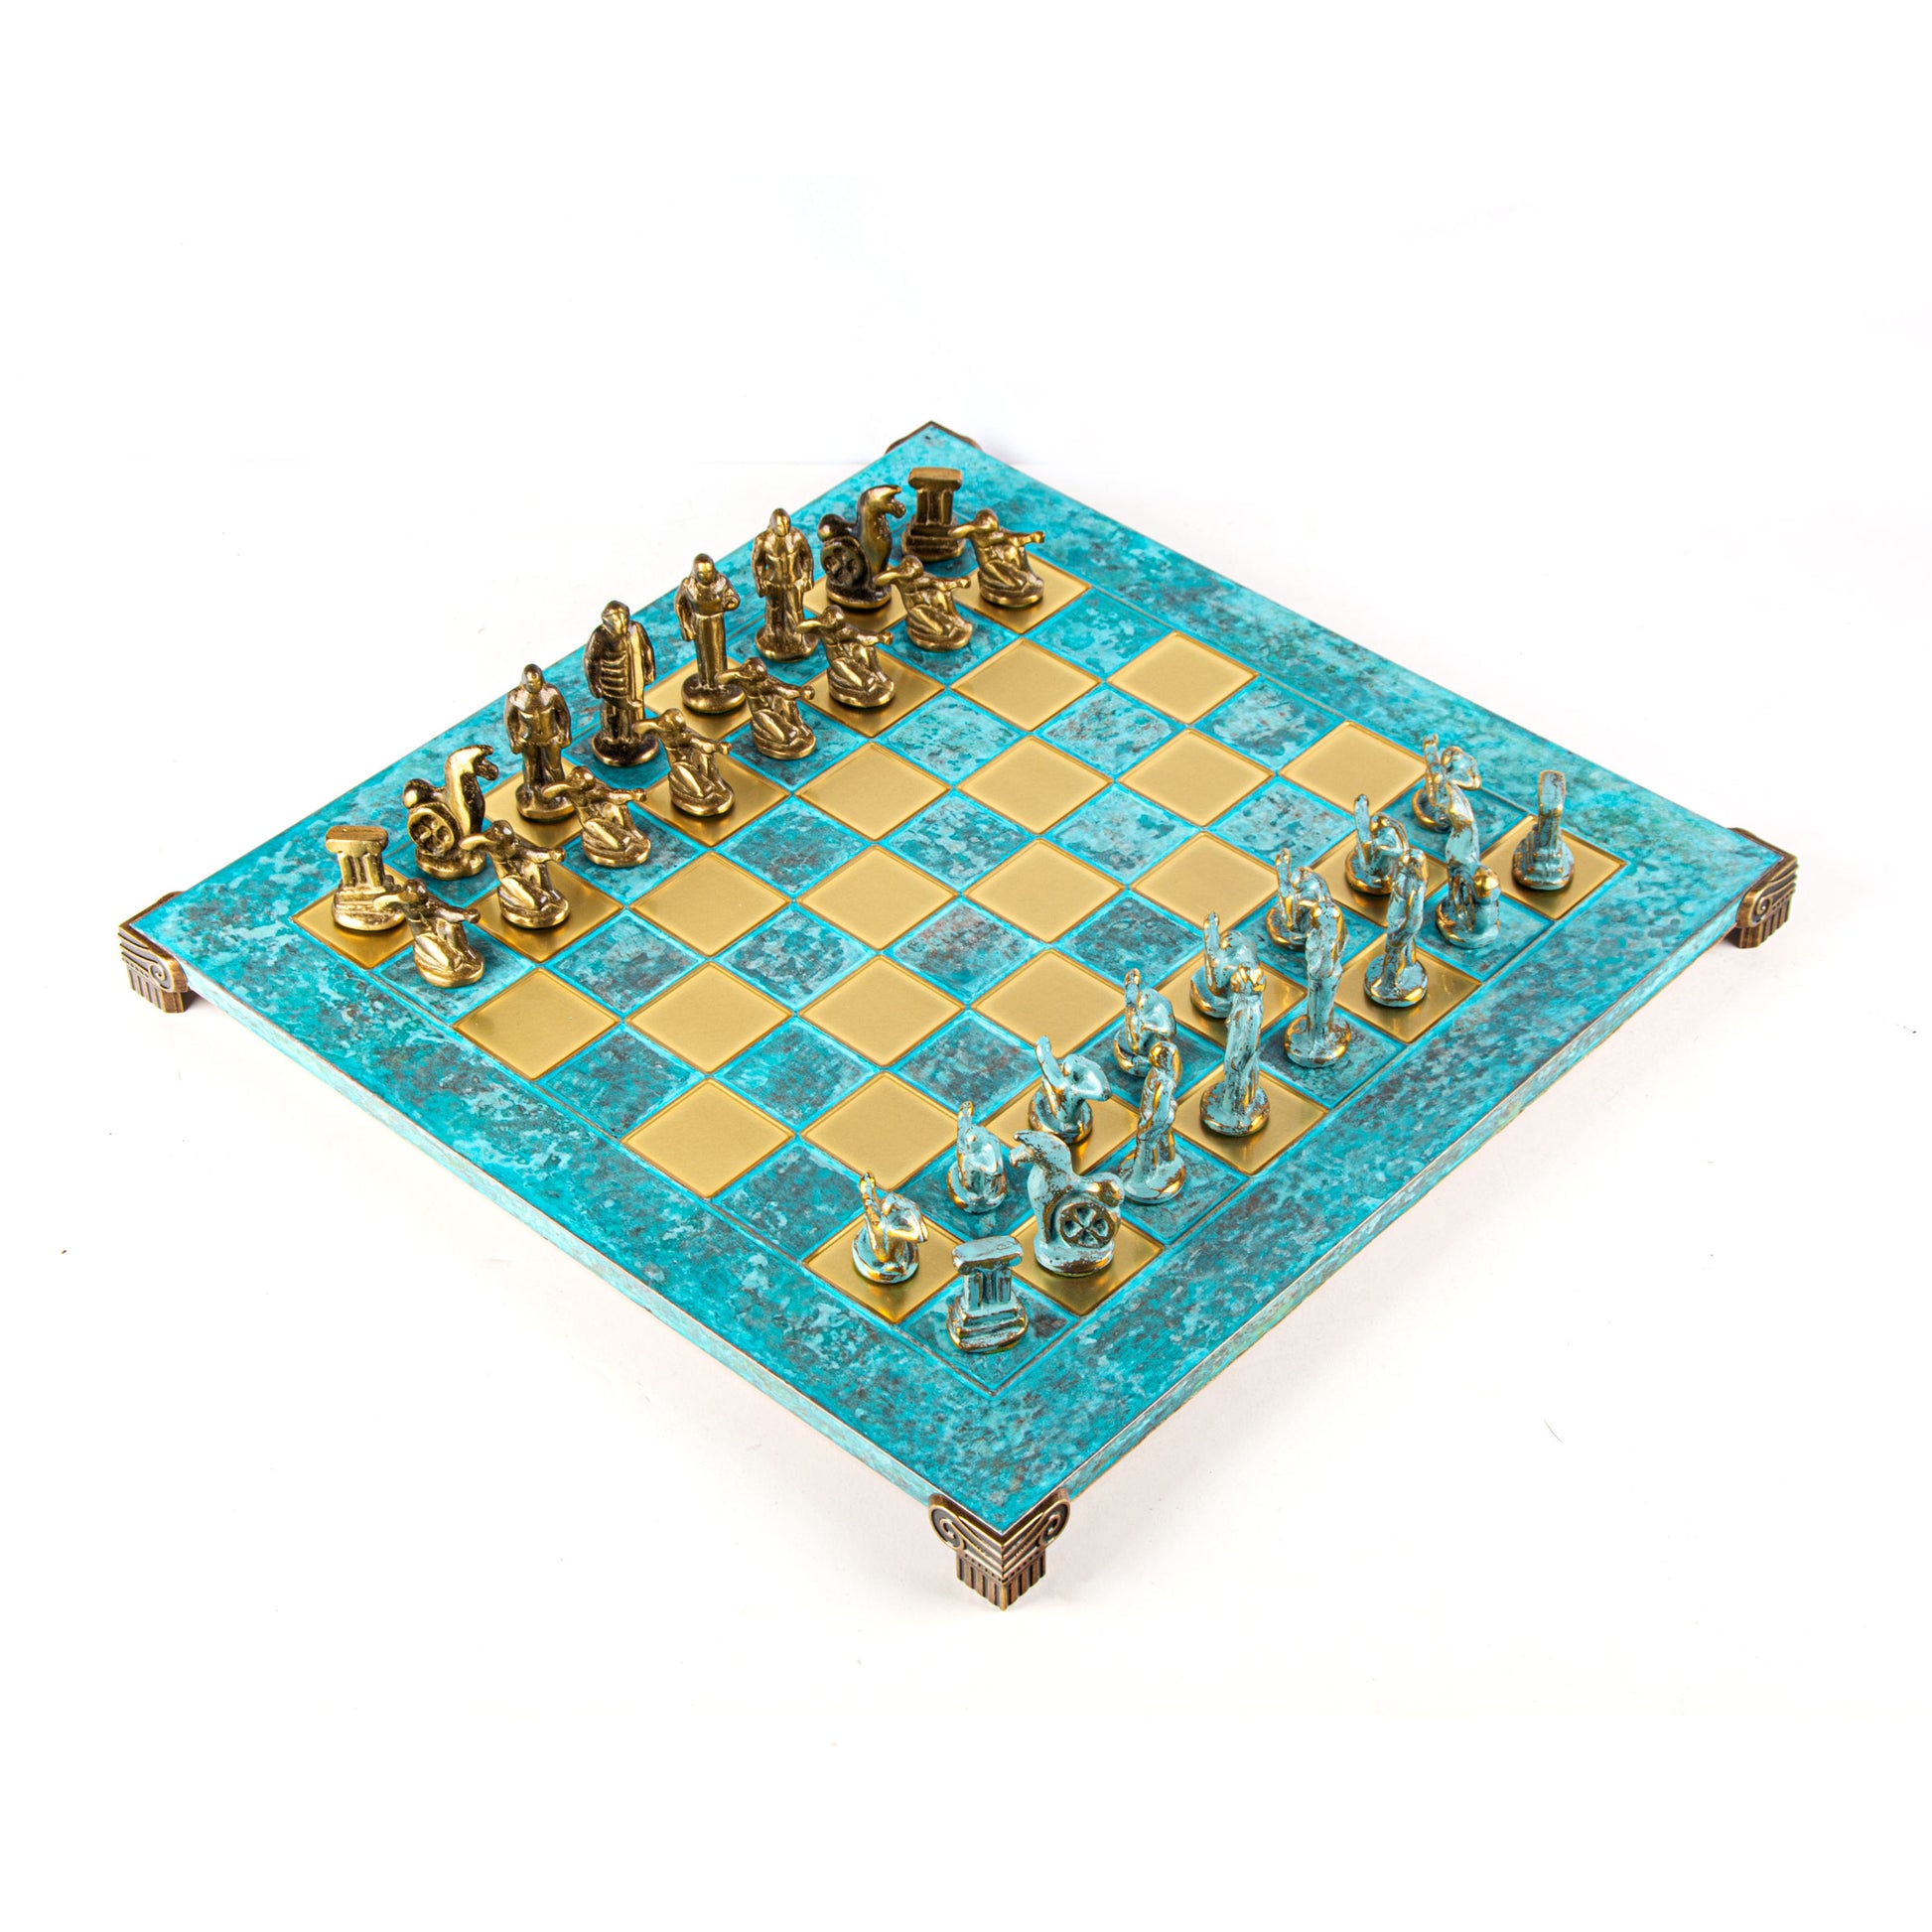 ARCHAIC PERIOD CHESS SET - Solid Brass with blue/brown chessmen and bronze chessboard 44 x 44cm (Large) - Premium Chess from MANOPOULOS Chess & Backgammon - Just €290! Shop now at MANOPOULOS Chess & Backgammon